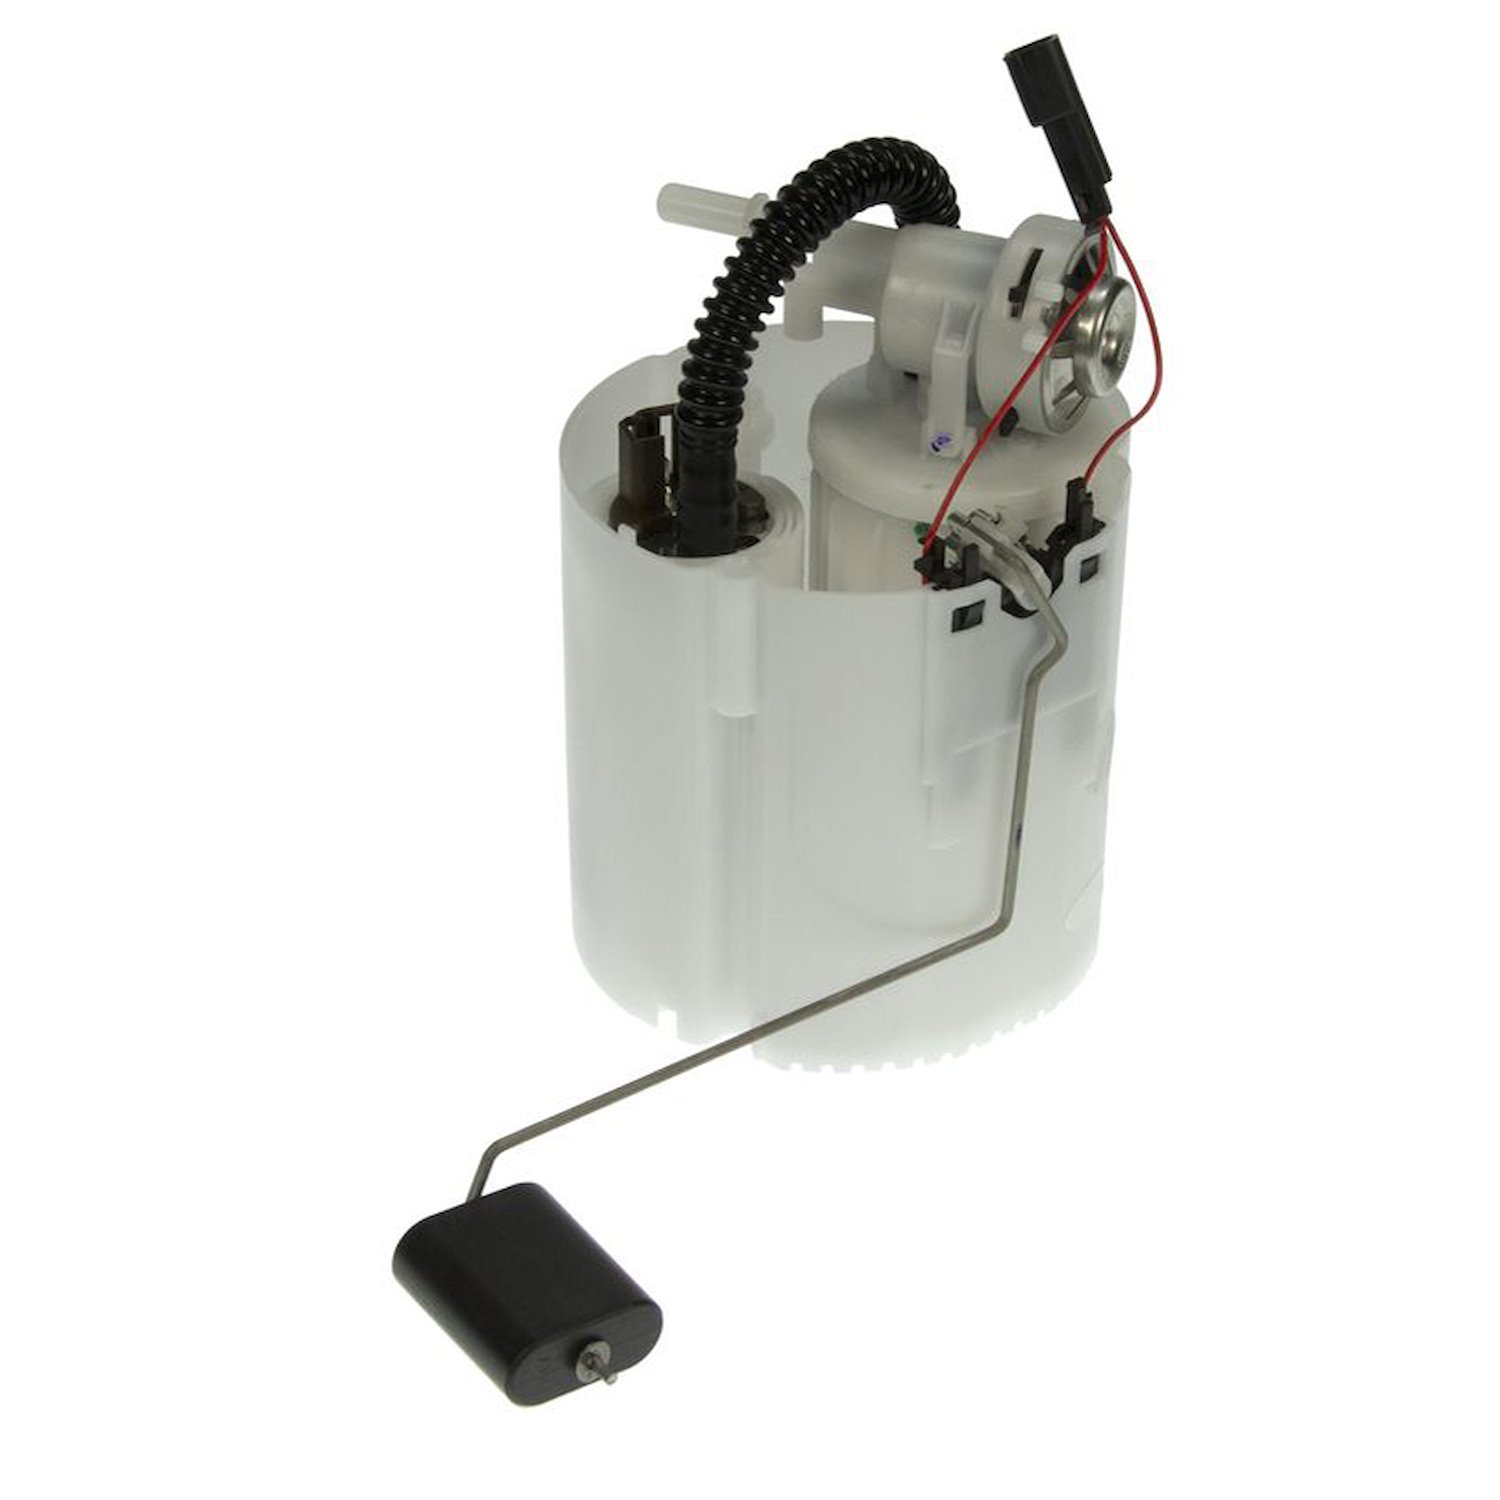 OE Replacement Electric Fuel Pump Module Assembly forr 2004-2007 Volvo V70/2005 Volvo S60